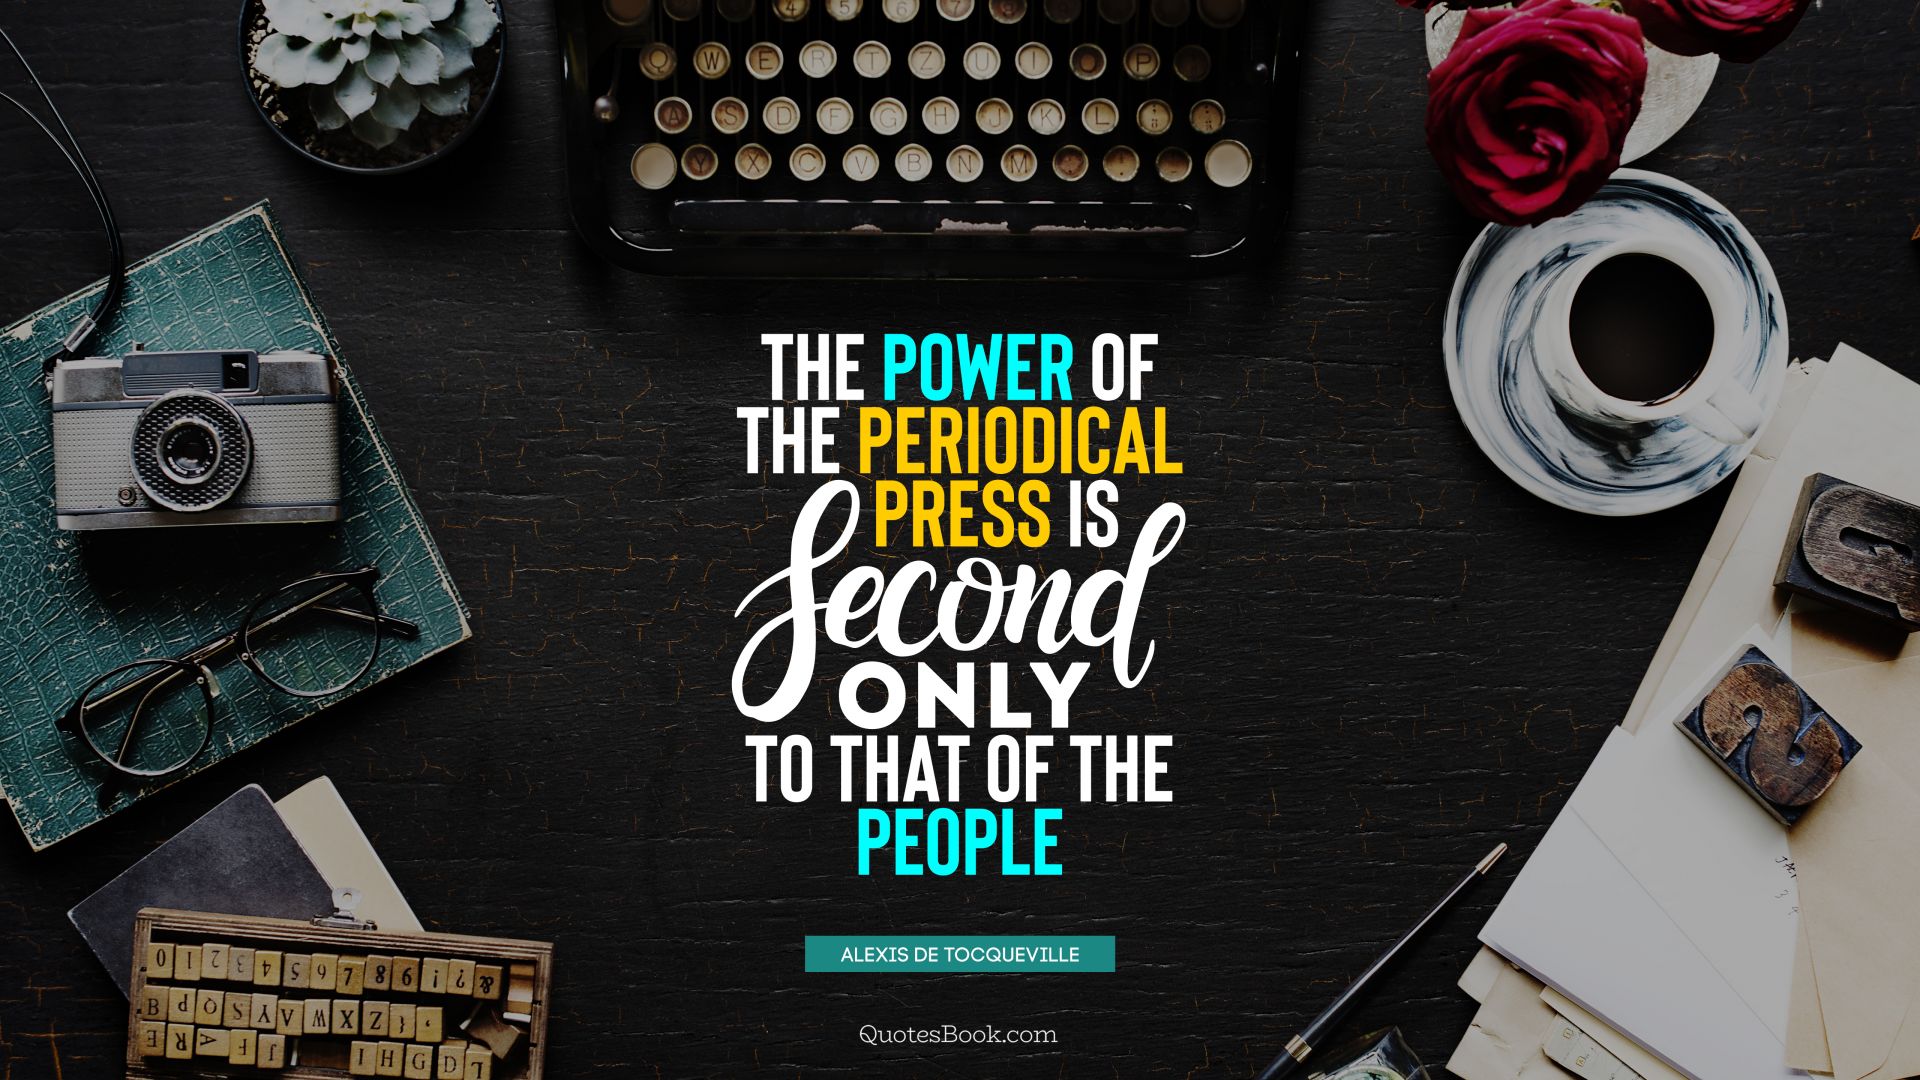 The power of the periodical press is second only to that of the people. - Quote by Alexis de Tocqueville